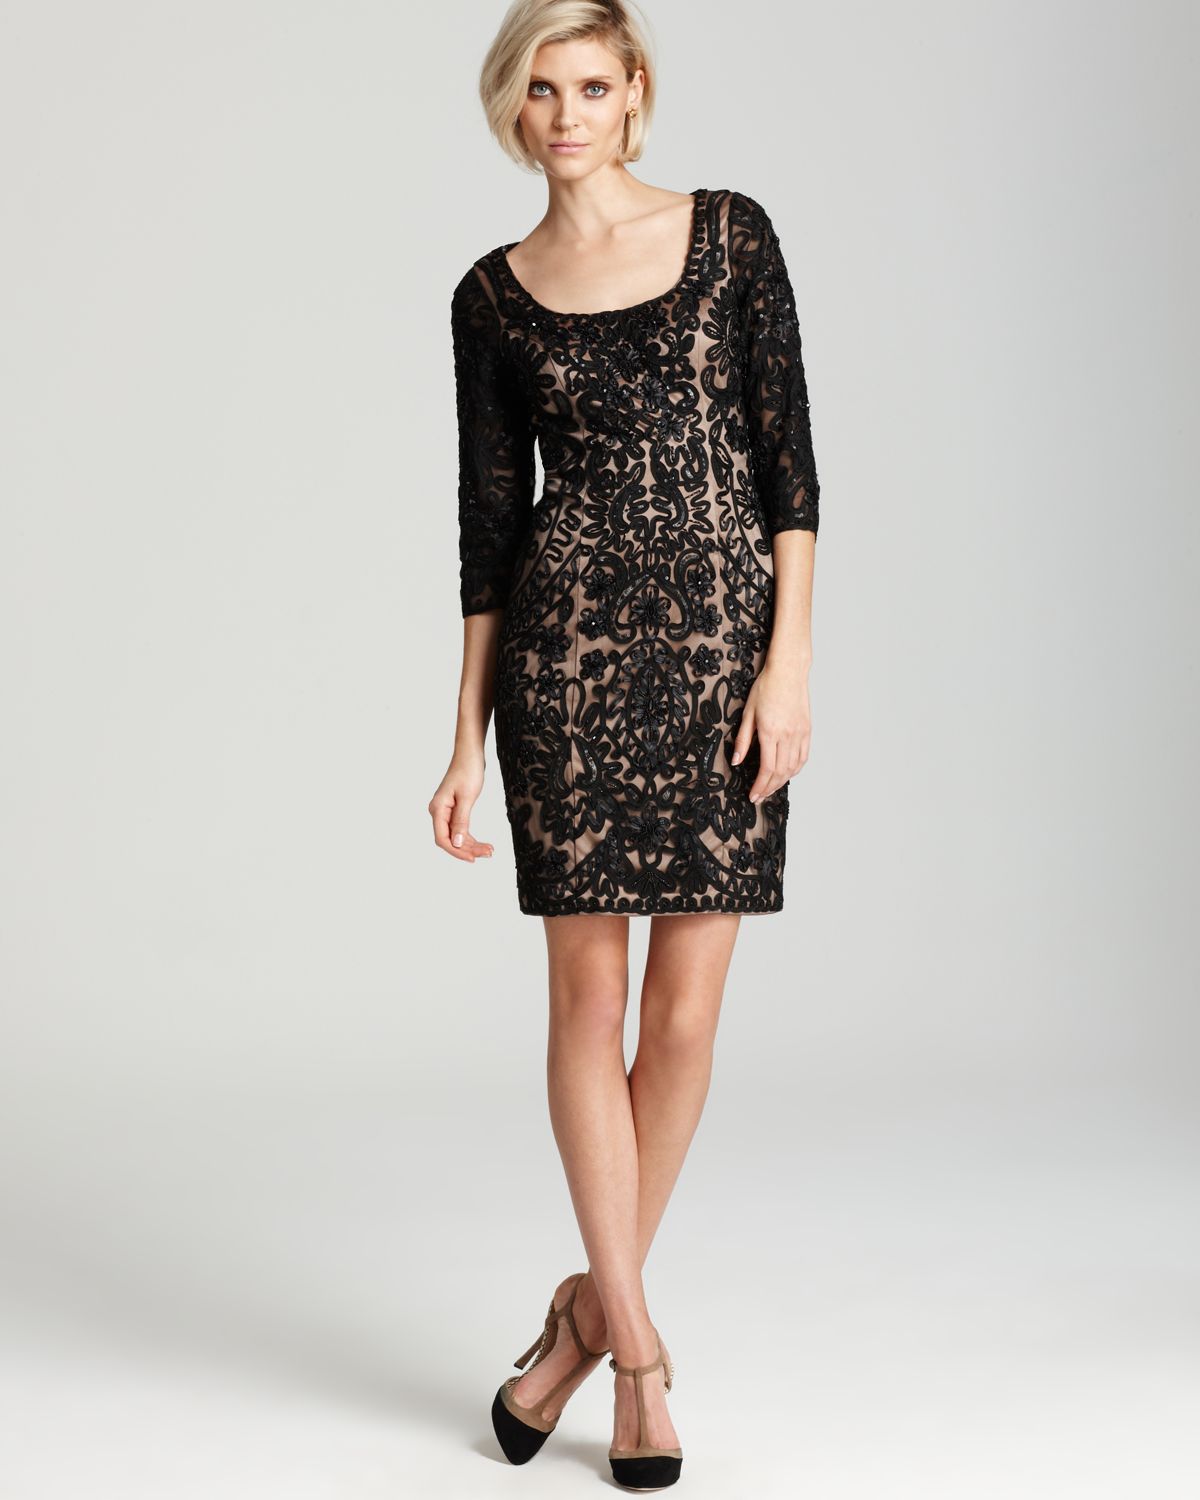 Sue wong Lace Dress Three Quarter Sleeve Scoop Neck in Black | Lyst